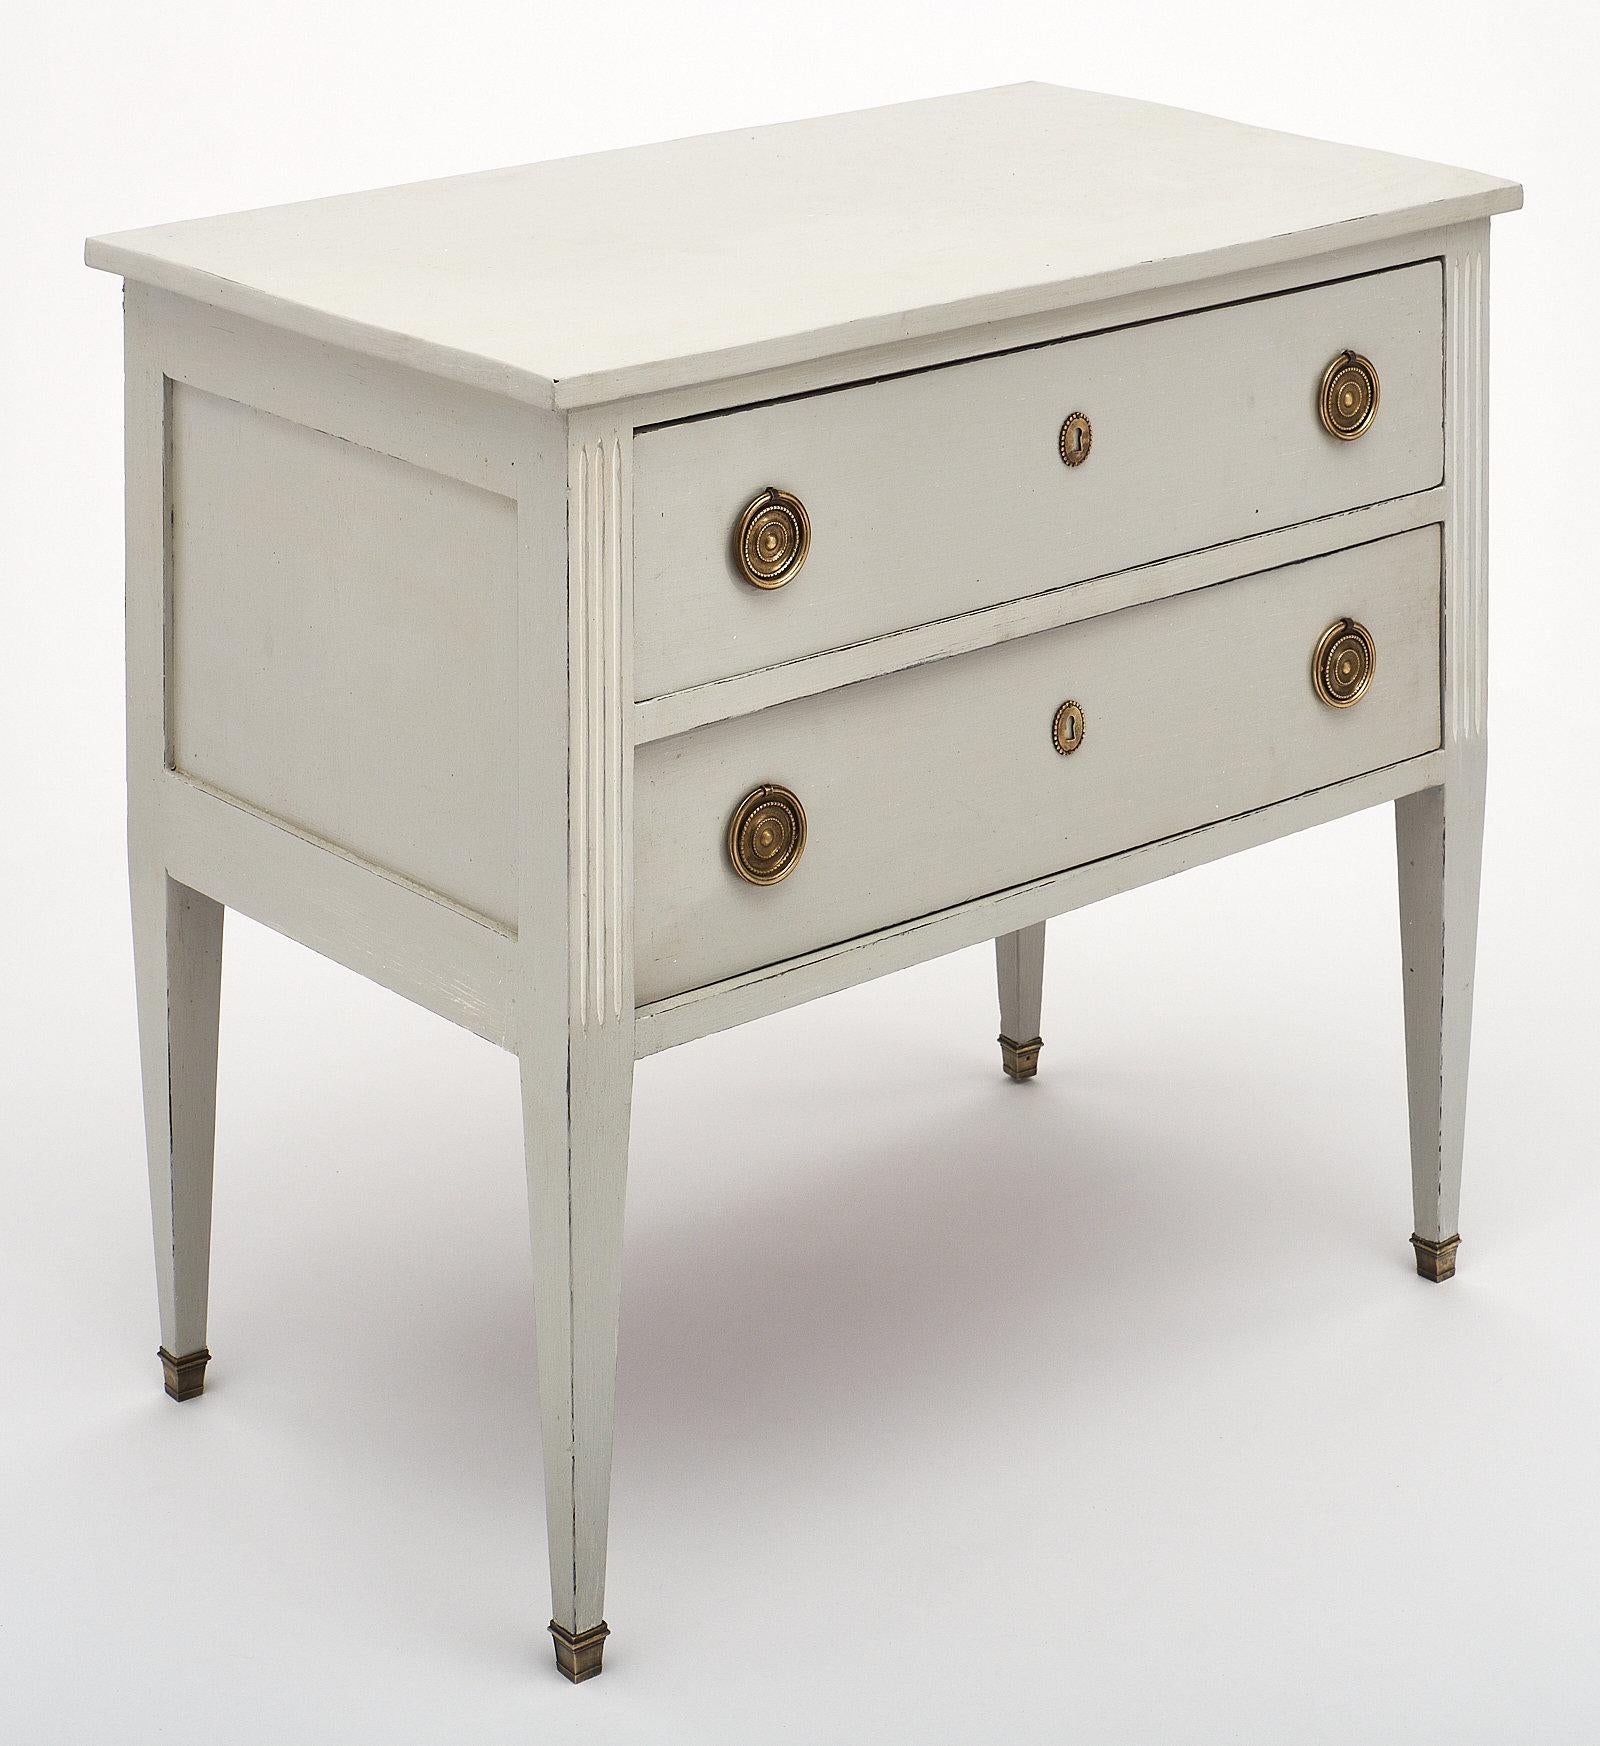 A French Directoire style painted chest of drawers with two large dovetailed drawers, tapered legs with bronze feet, and original bronze hardware. This piece is made of cherry wood. We love the dove gray color with white fluted details.